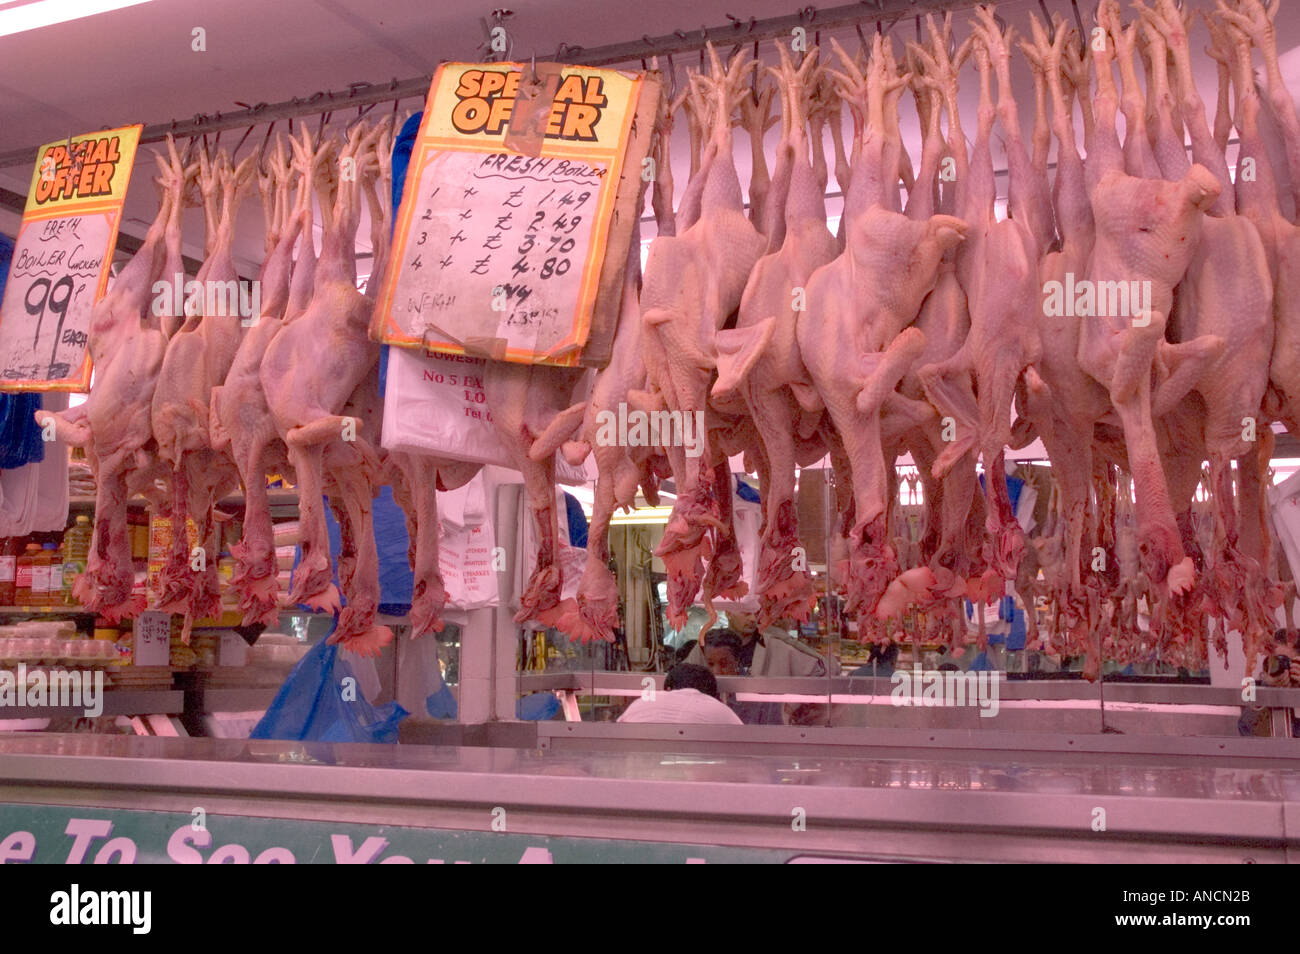 Fresh boiler chickens hanging in a butcher shop, displayed in a row with price attached. Stock Photo